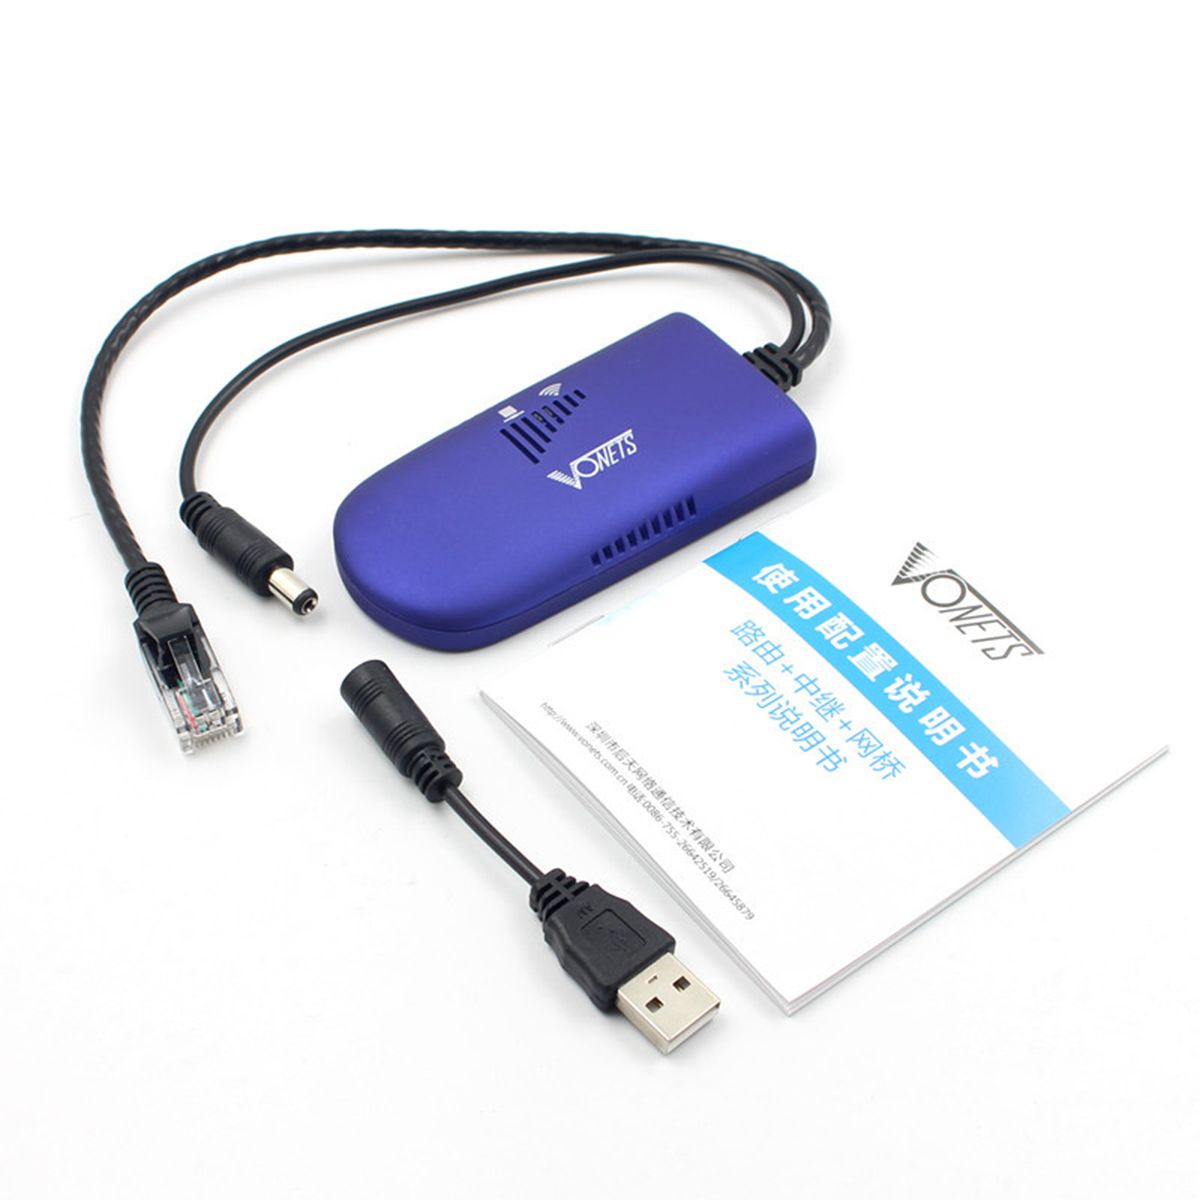 VONETS-300Mbps-USB20-Wireless-Repeater-WiFi-Bridge-Extender-Amplifier-WiFi-Booster-AP-Expand-WiFi-VA-1731809